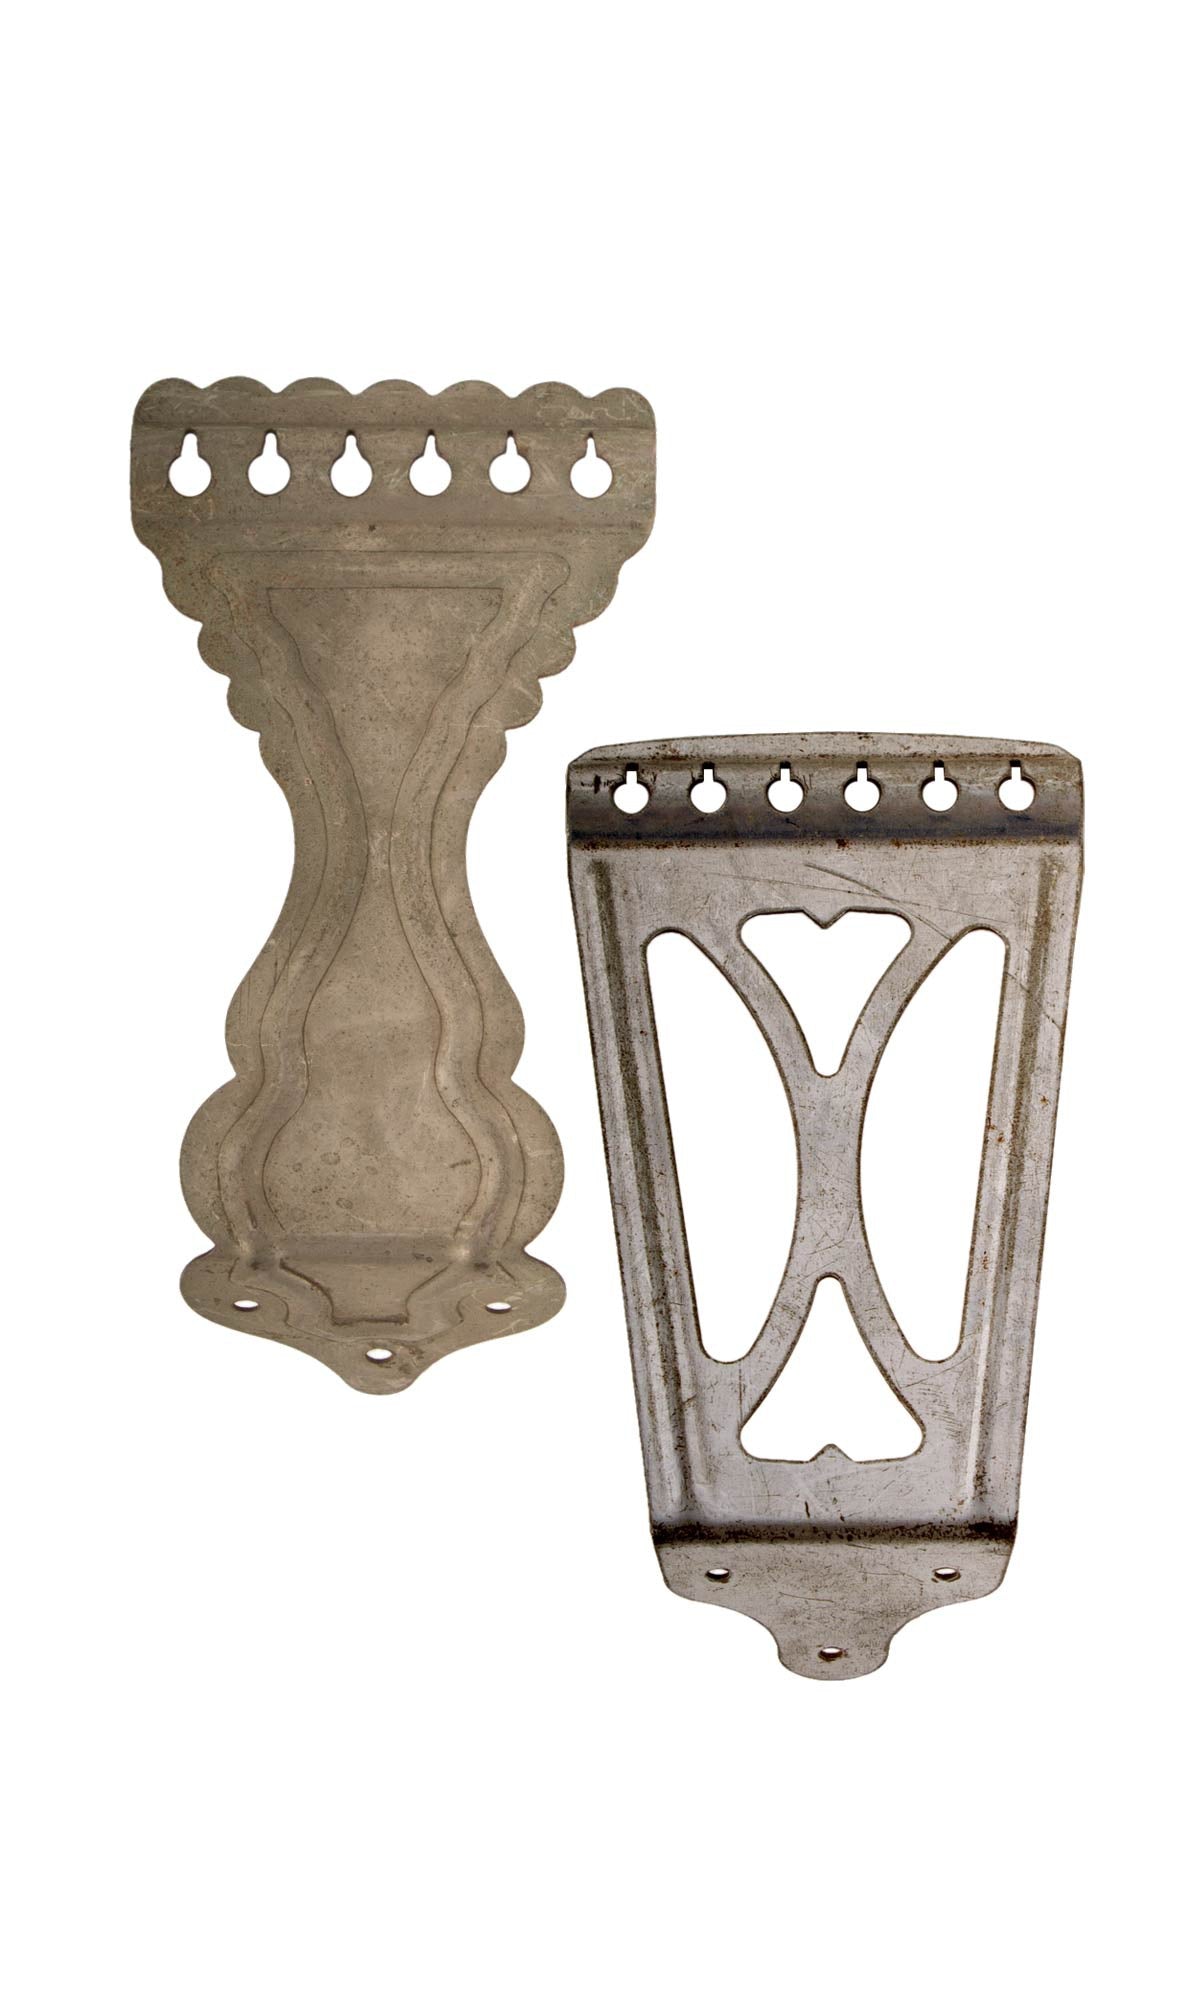 Flat-Top Nickel-Plated Tailpieces Old